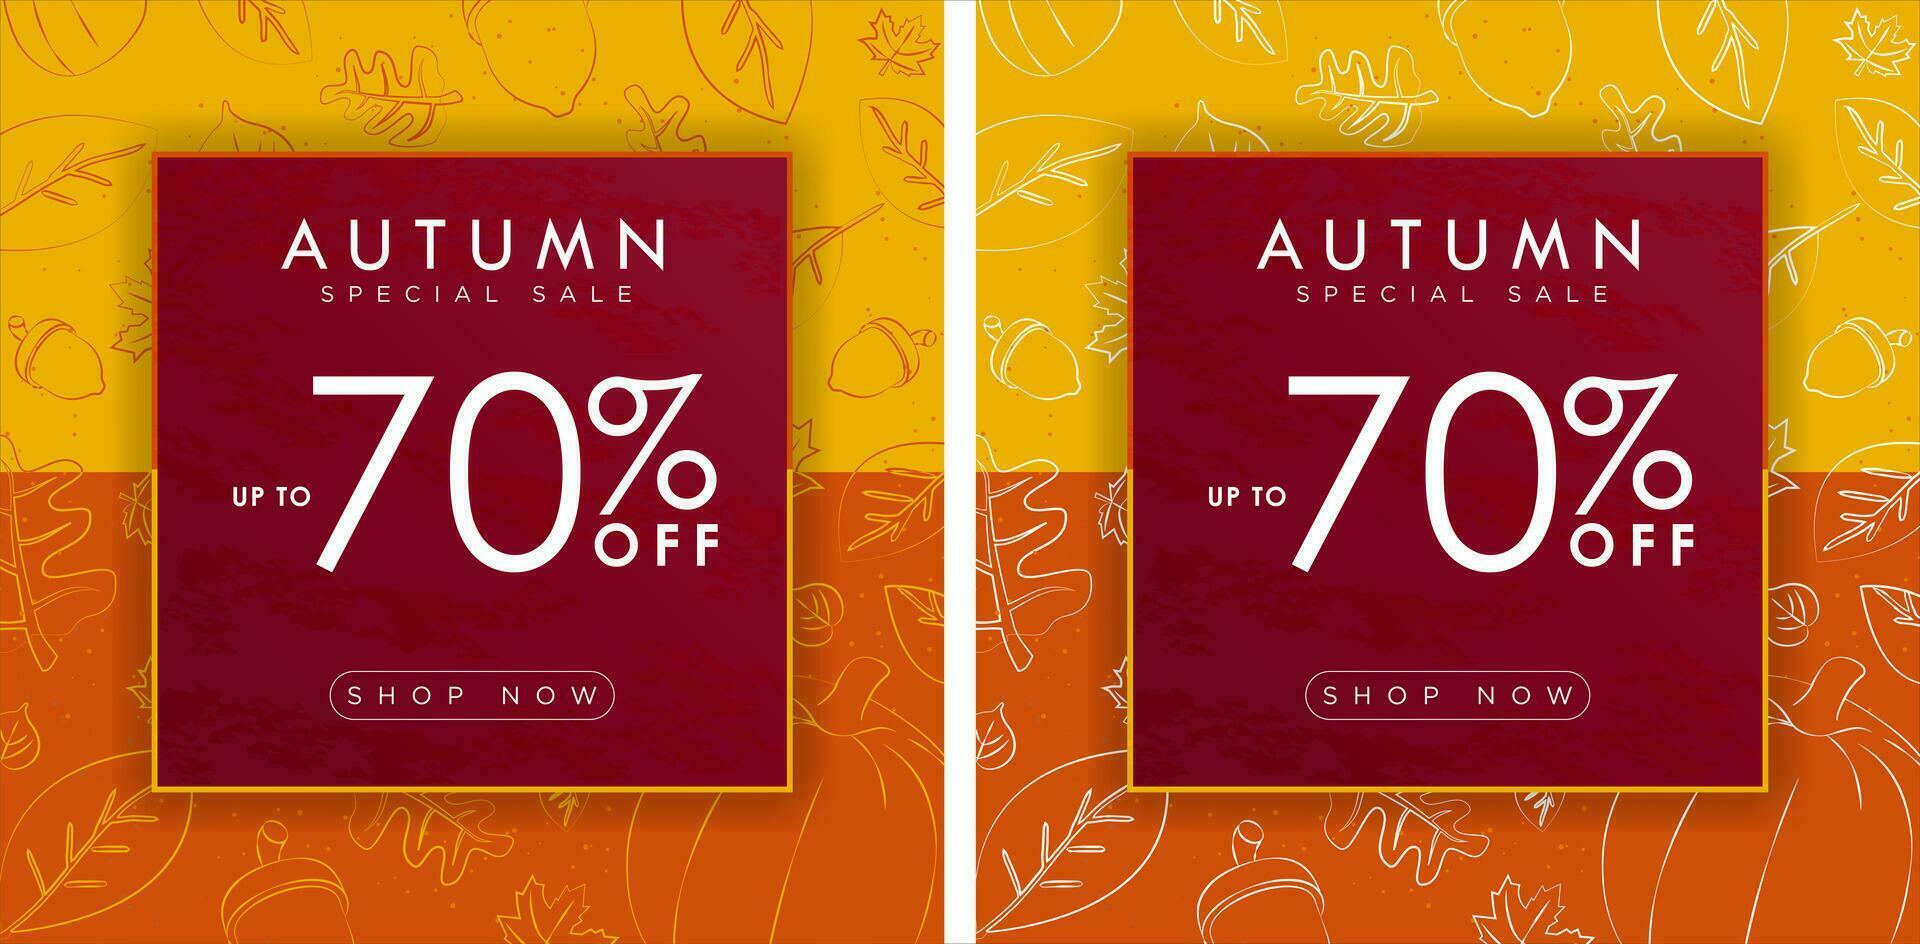 Set of Autumn Sale card, background, banner, poster or flyer design. Up to 70 off discount with shop now CTA button. Drawing of autumn elements, maple leaves, pumpkin, acorn. Vector illustration.